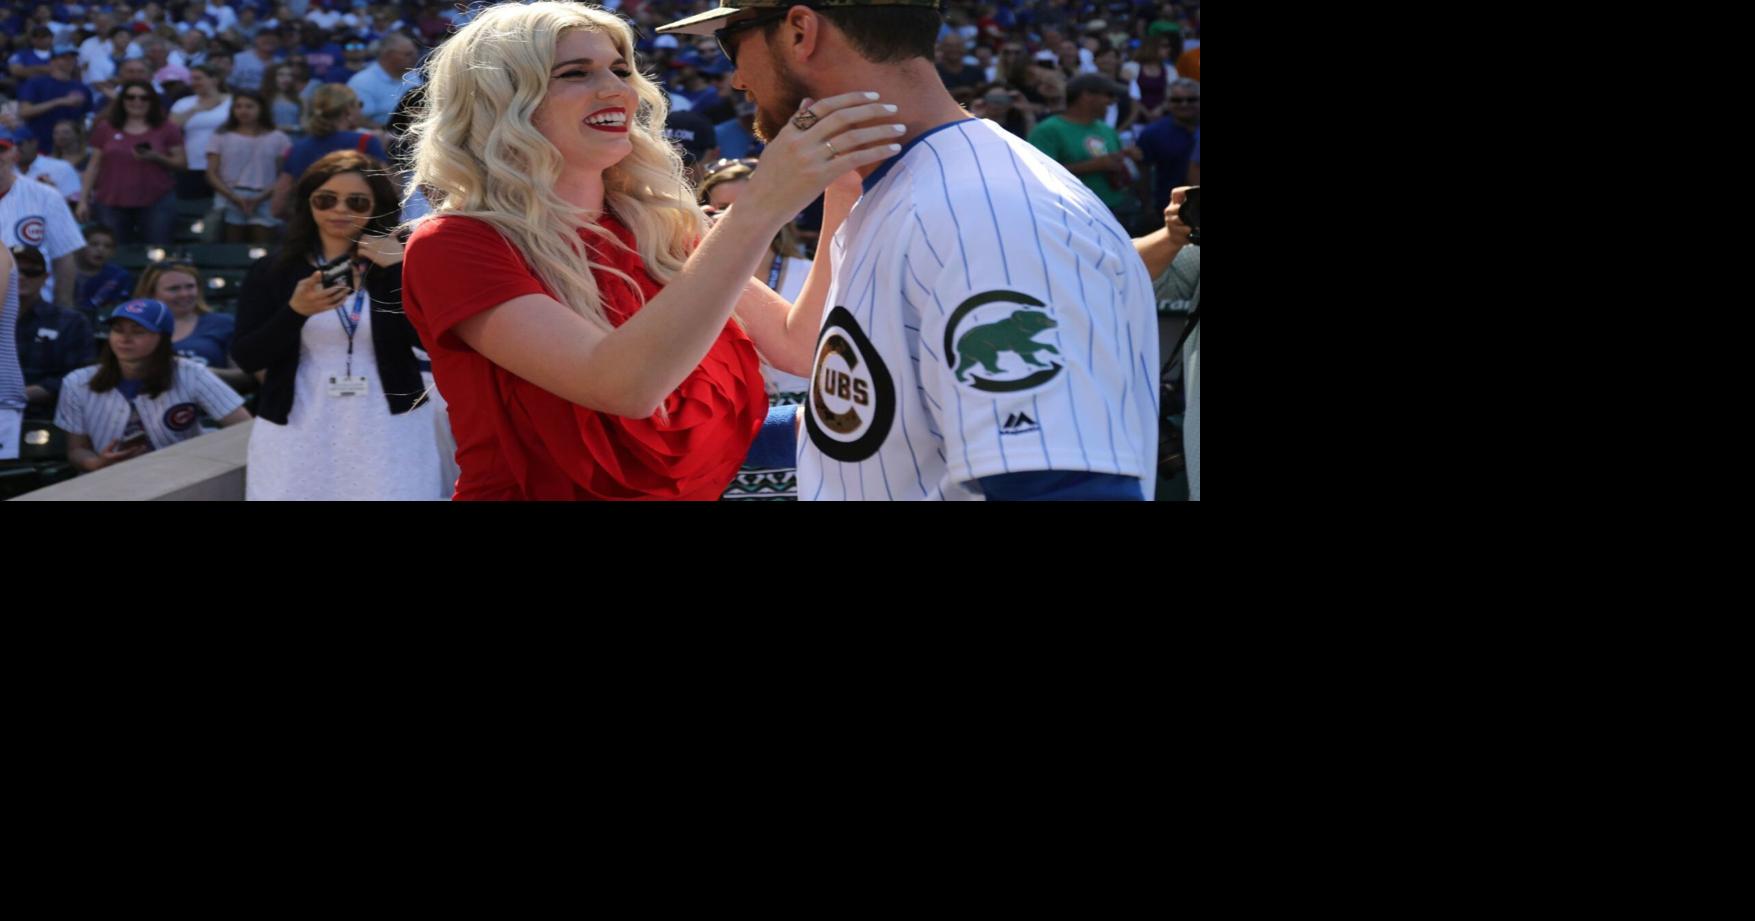 In divorce documents, Ben Zobrist says Julianna 'coaxed' him into returning  to the Chicago Cubs, while she requests $4M of the $8M he forfeited while  on leave